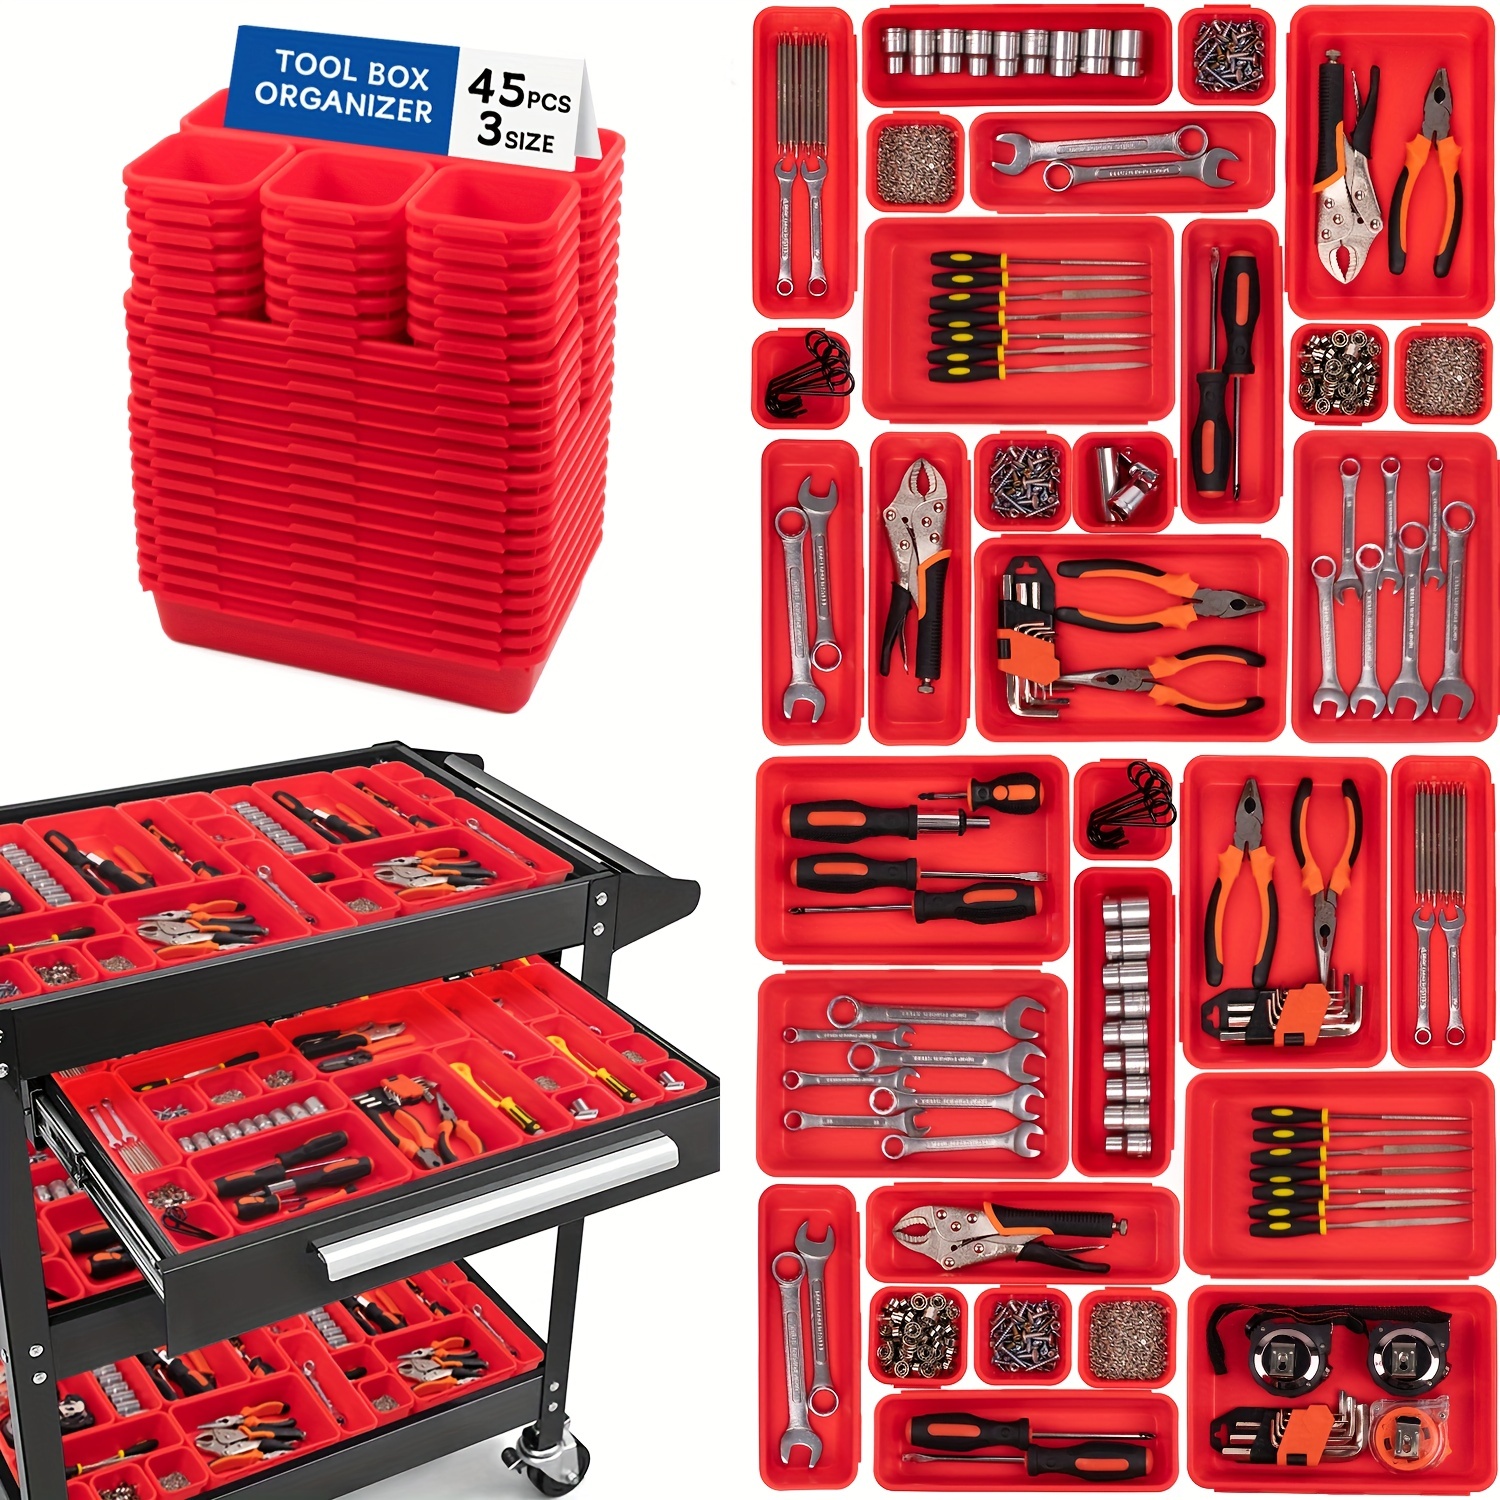 45pcs Tool Box Organizer: Maximize Your Tool Chest Storage with Drawer  Dividers & Trays!